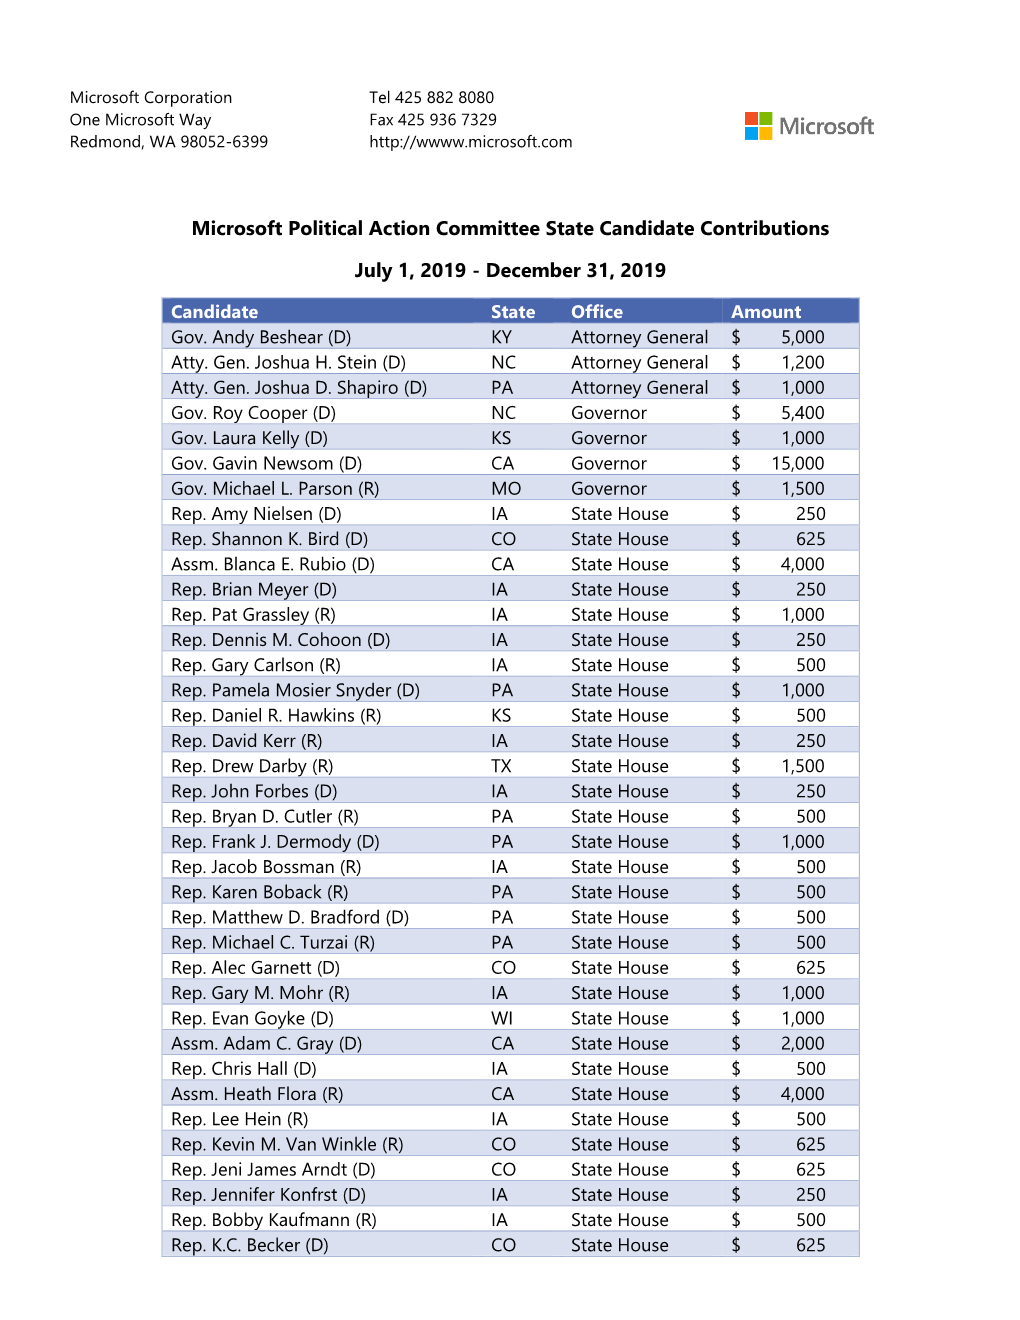 Microsoft Political Action Committee State Candidate Contributions July 1, 2019